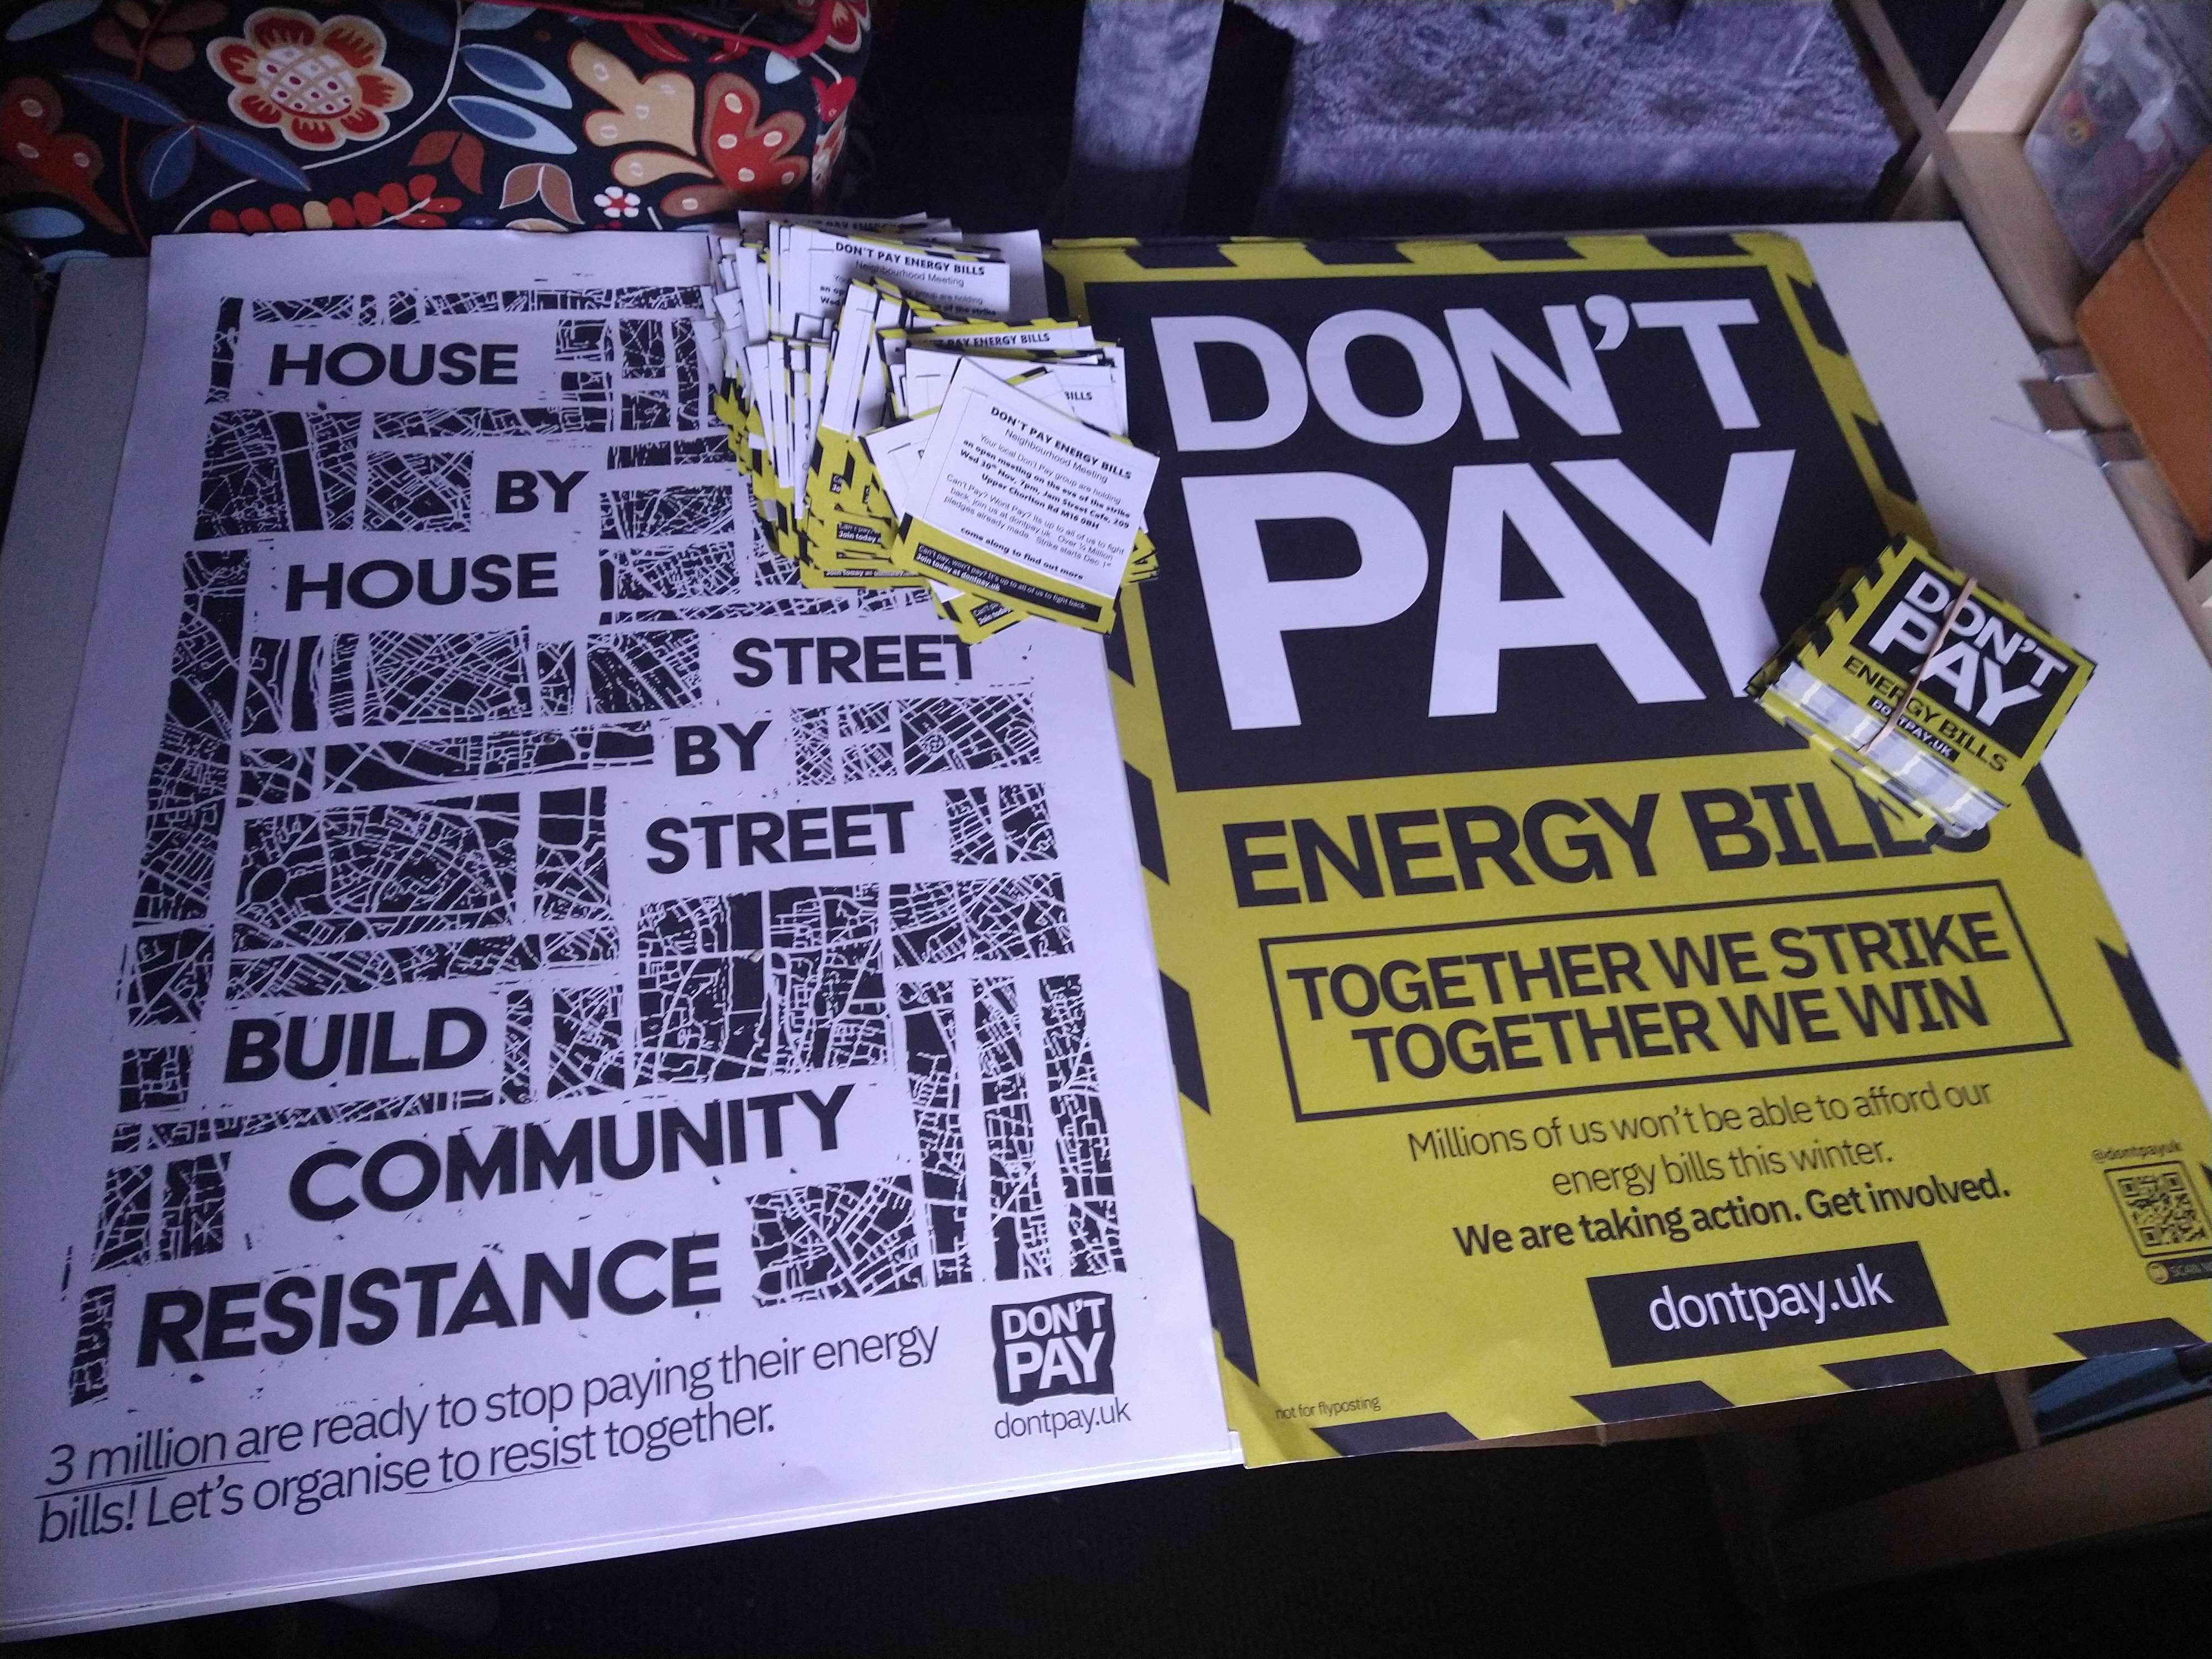 House by House, Street by Street, Build Community Resistance. 3 million are ready to stop paying their energy bills. Let’s organise to resist together. Don’t pay energy bills. Together we strike, together we win. Millions of us won’t be able to afford our energy bills this winter. We are taking action. Get involved. dontpay.uk